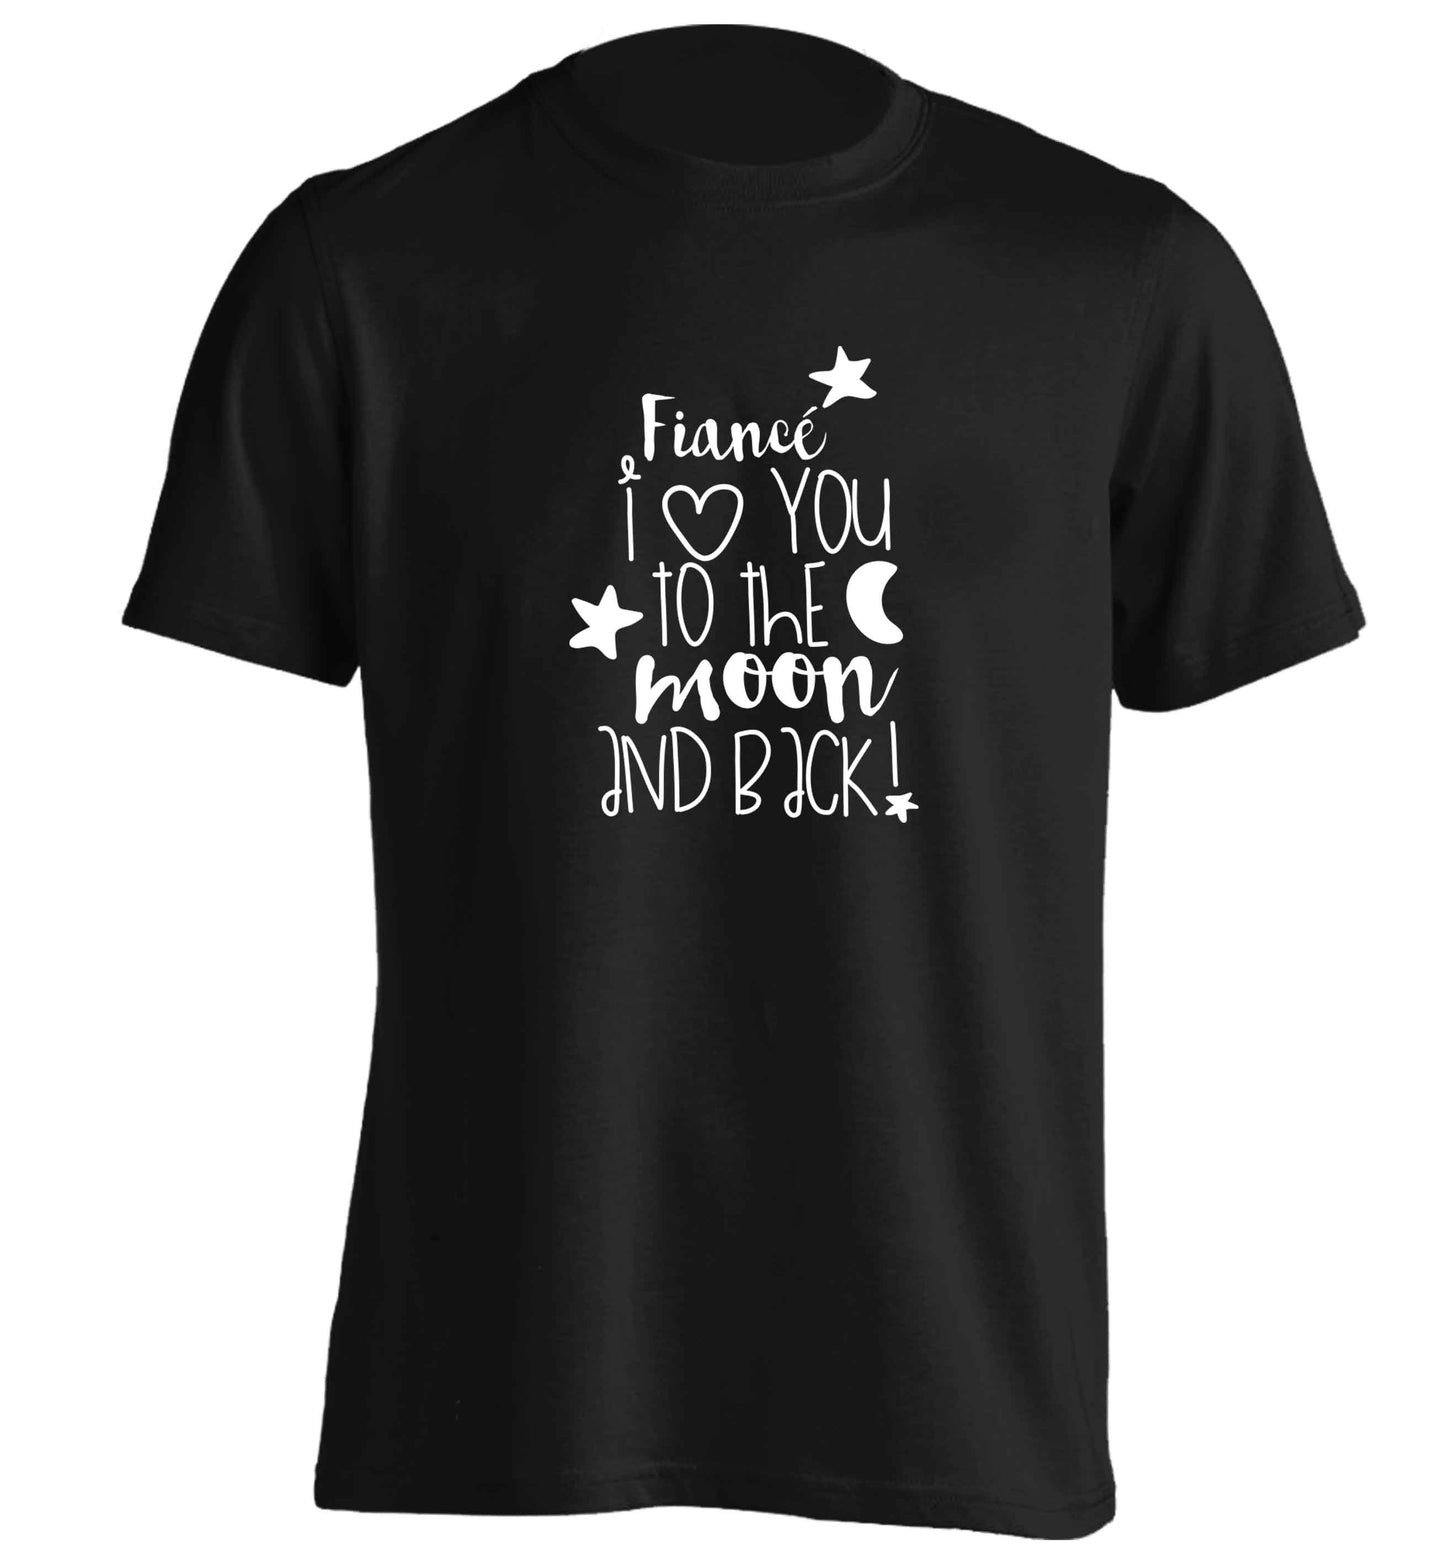 Fianc√© I love you to the moon and back adults unisex black Tshirt 2XL